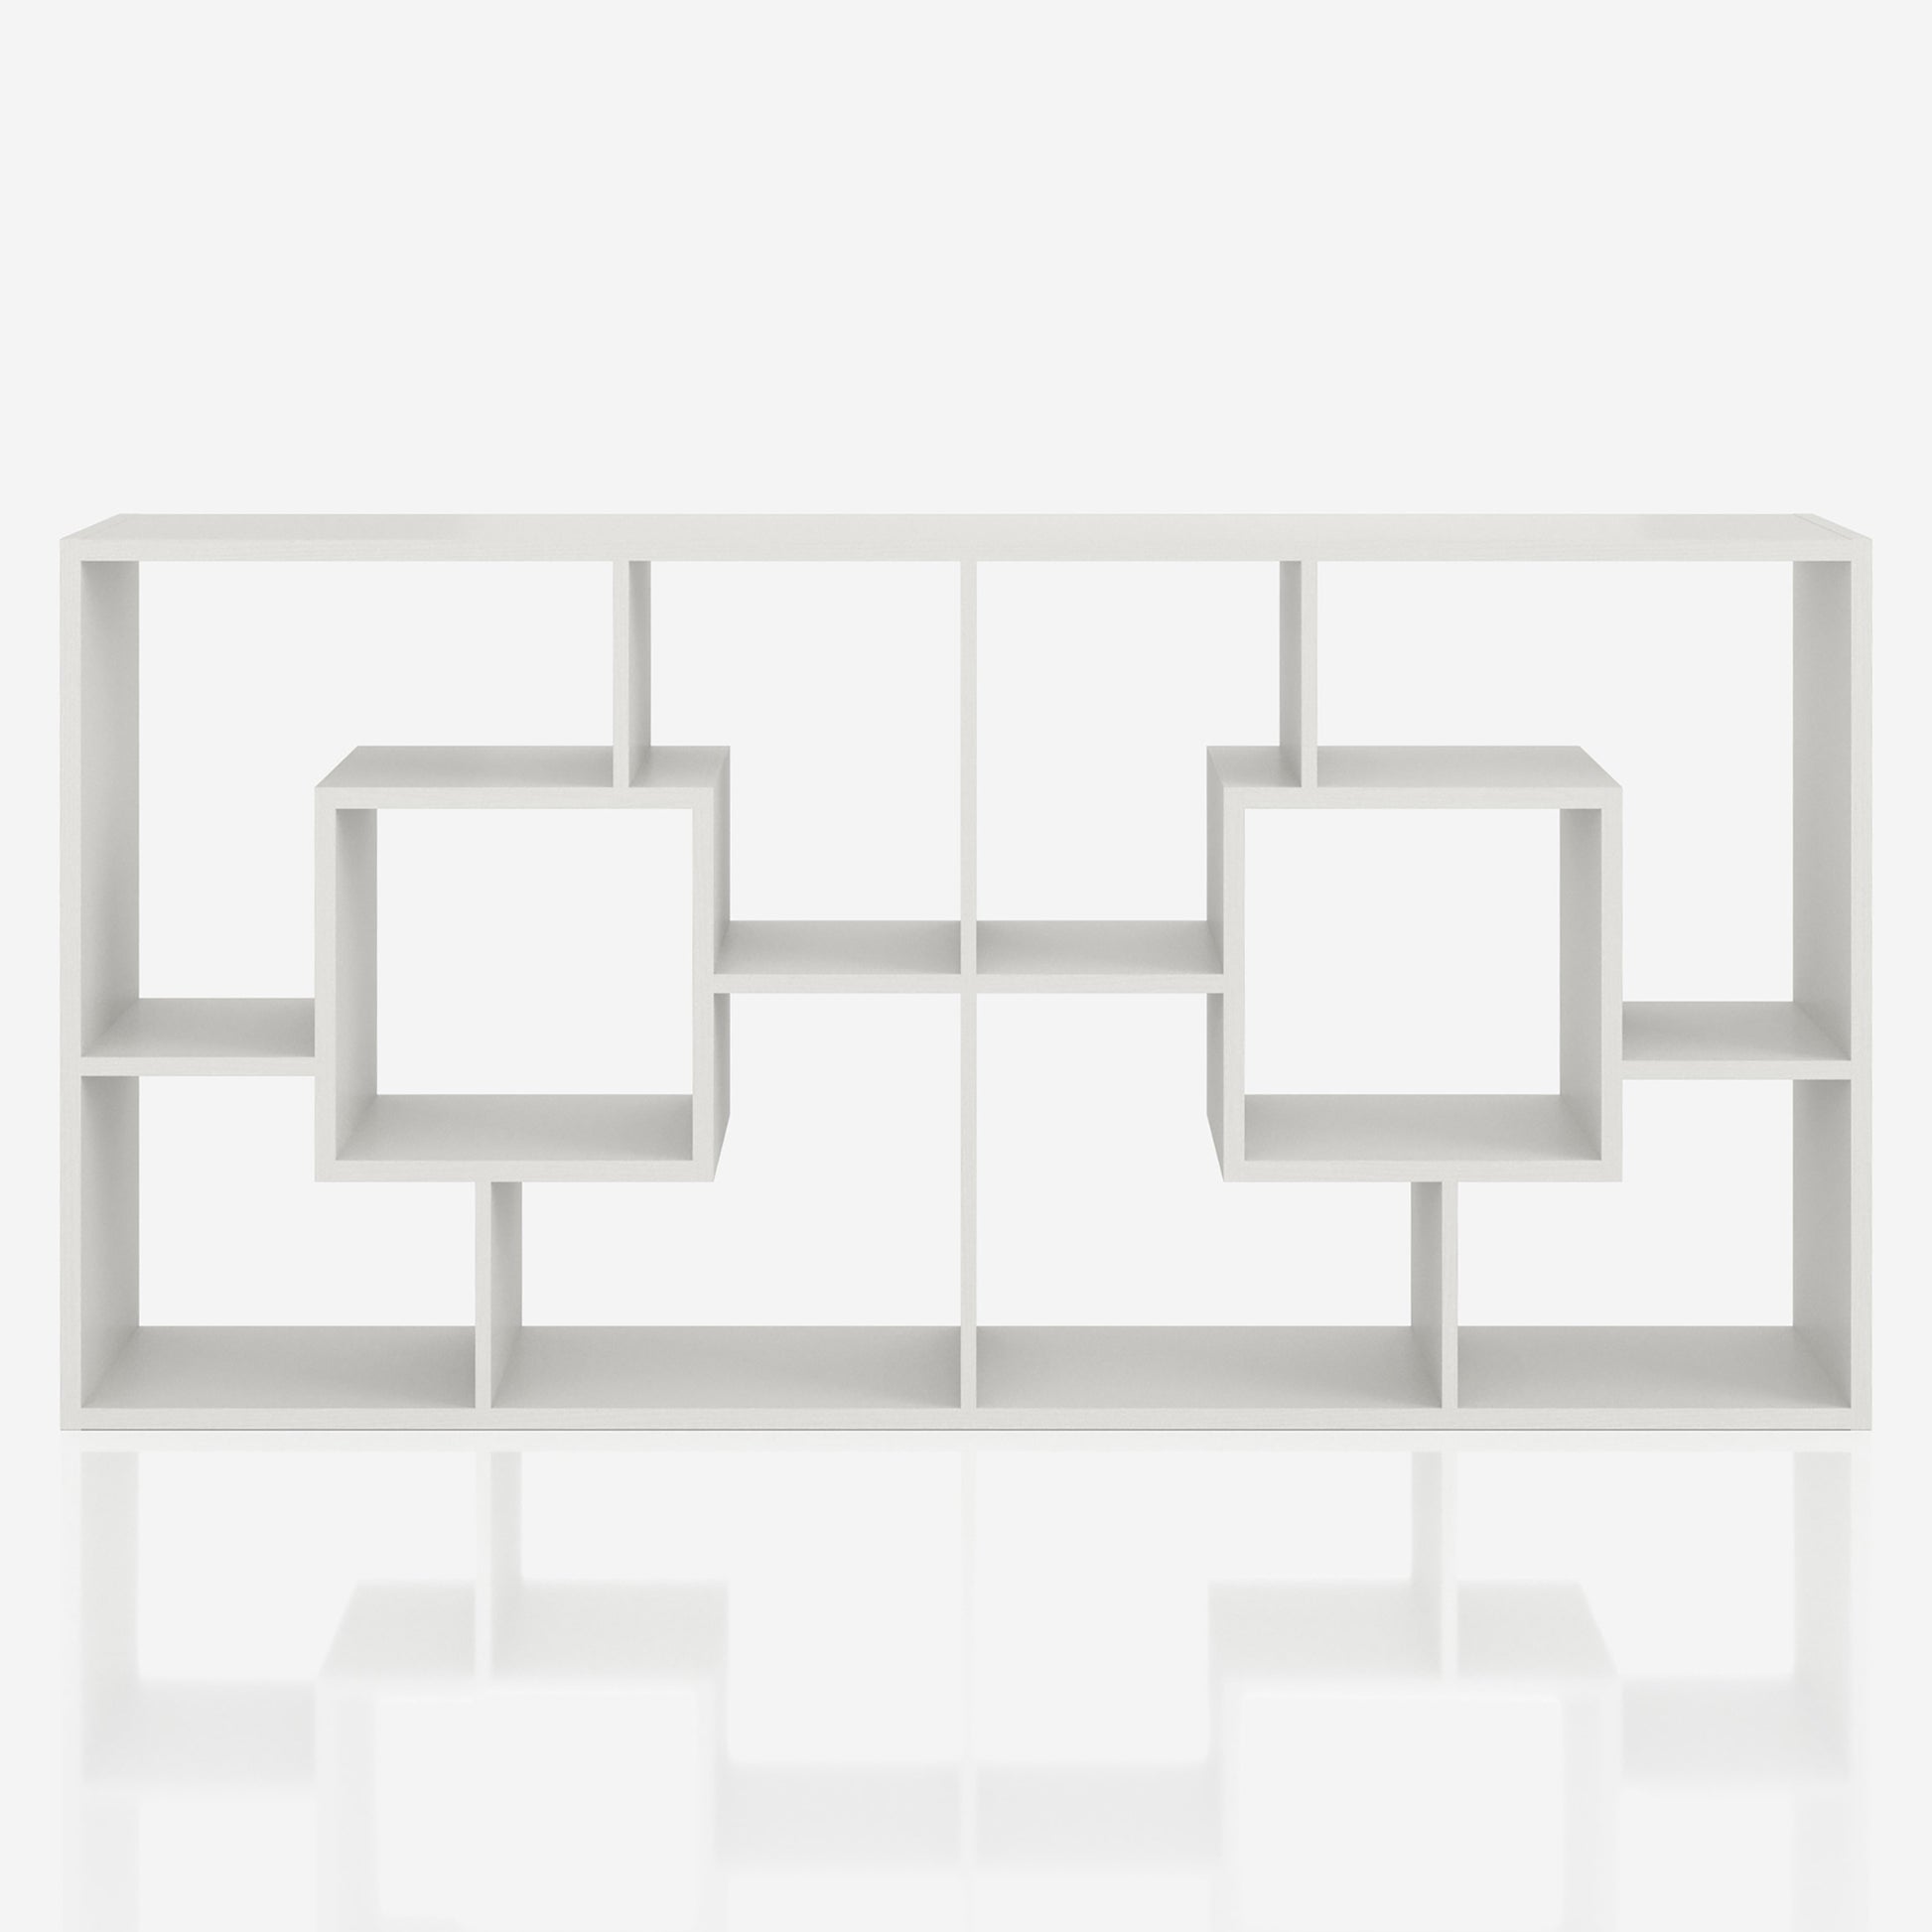 Front-facing horizontal modern white geometric cube open display bookcase on a white background